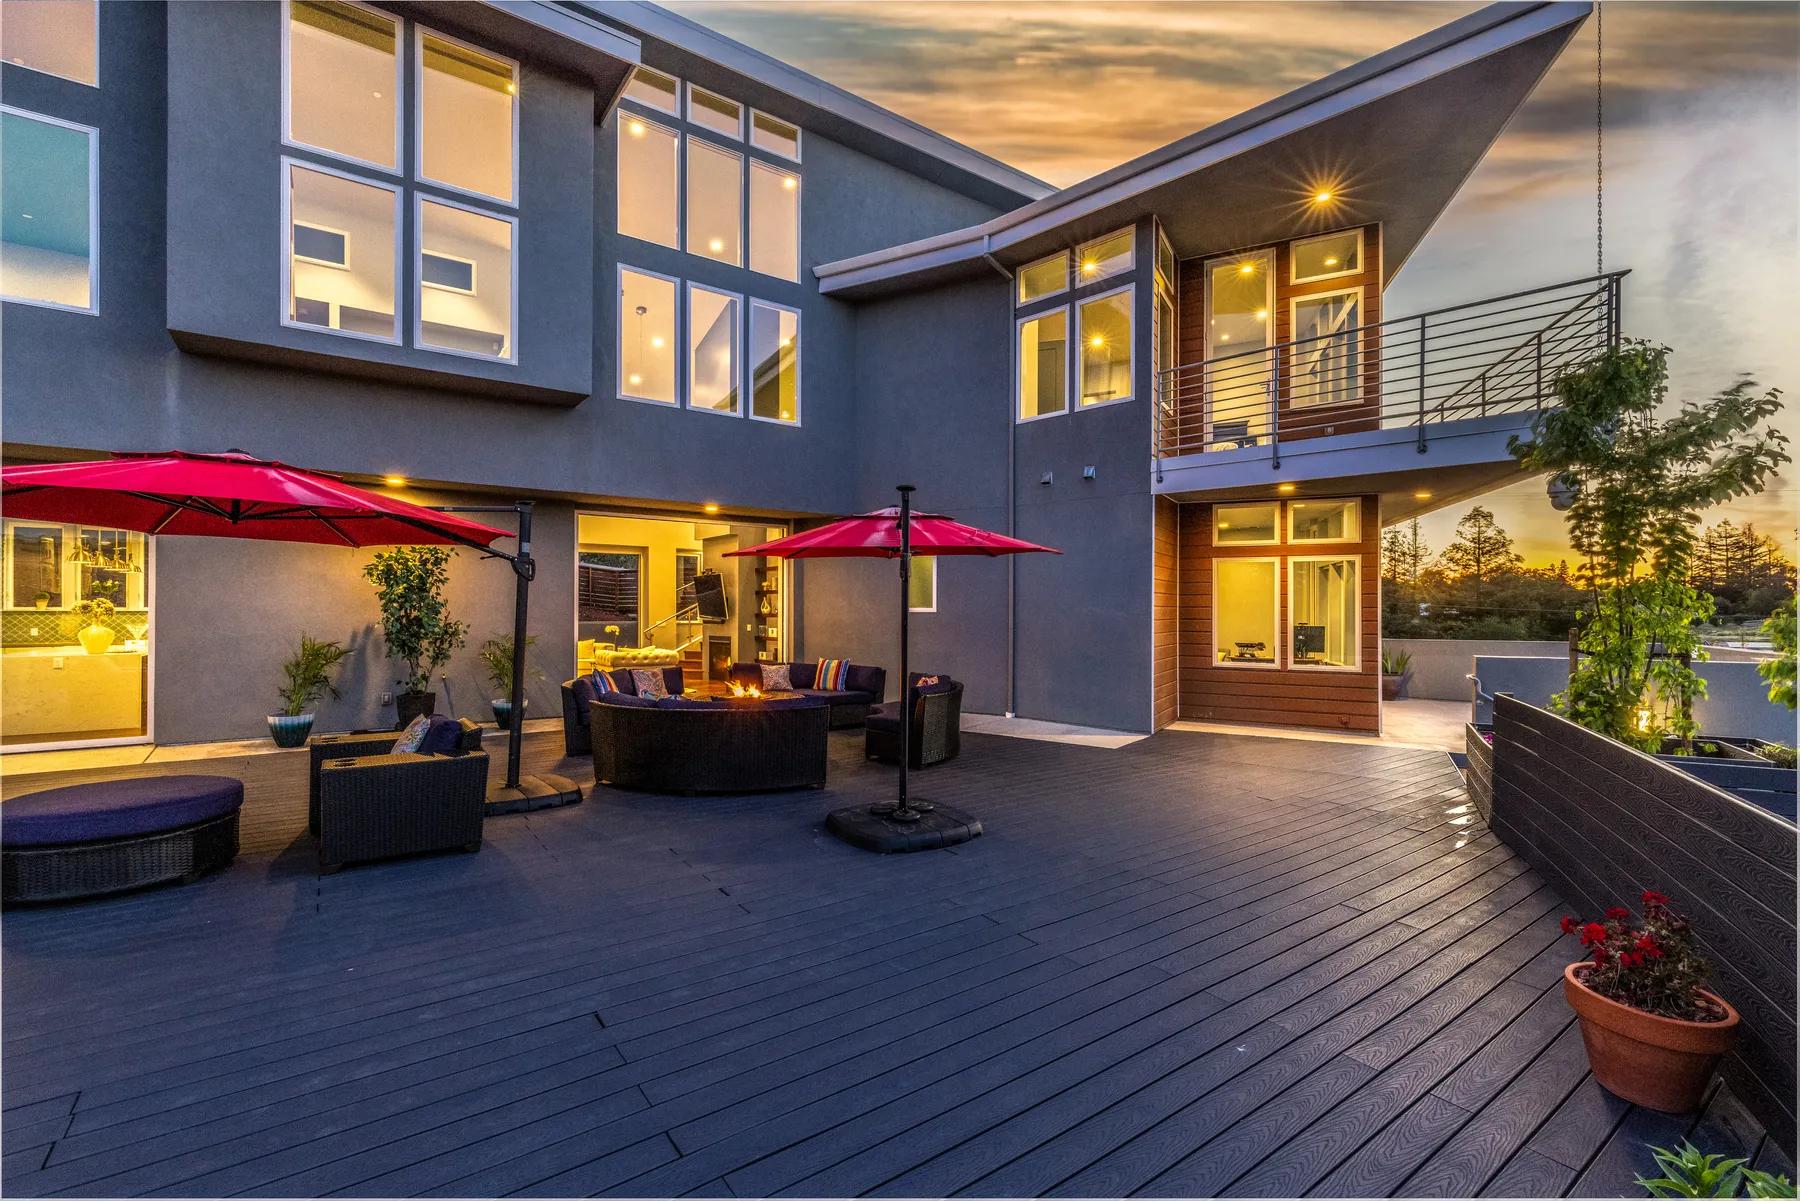 Find Luxury Real Estate in Silicon Valley | Corcoran Global Living 